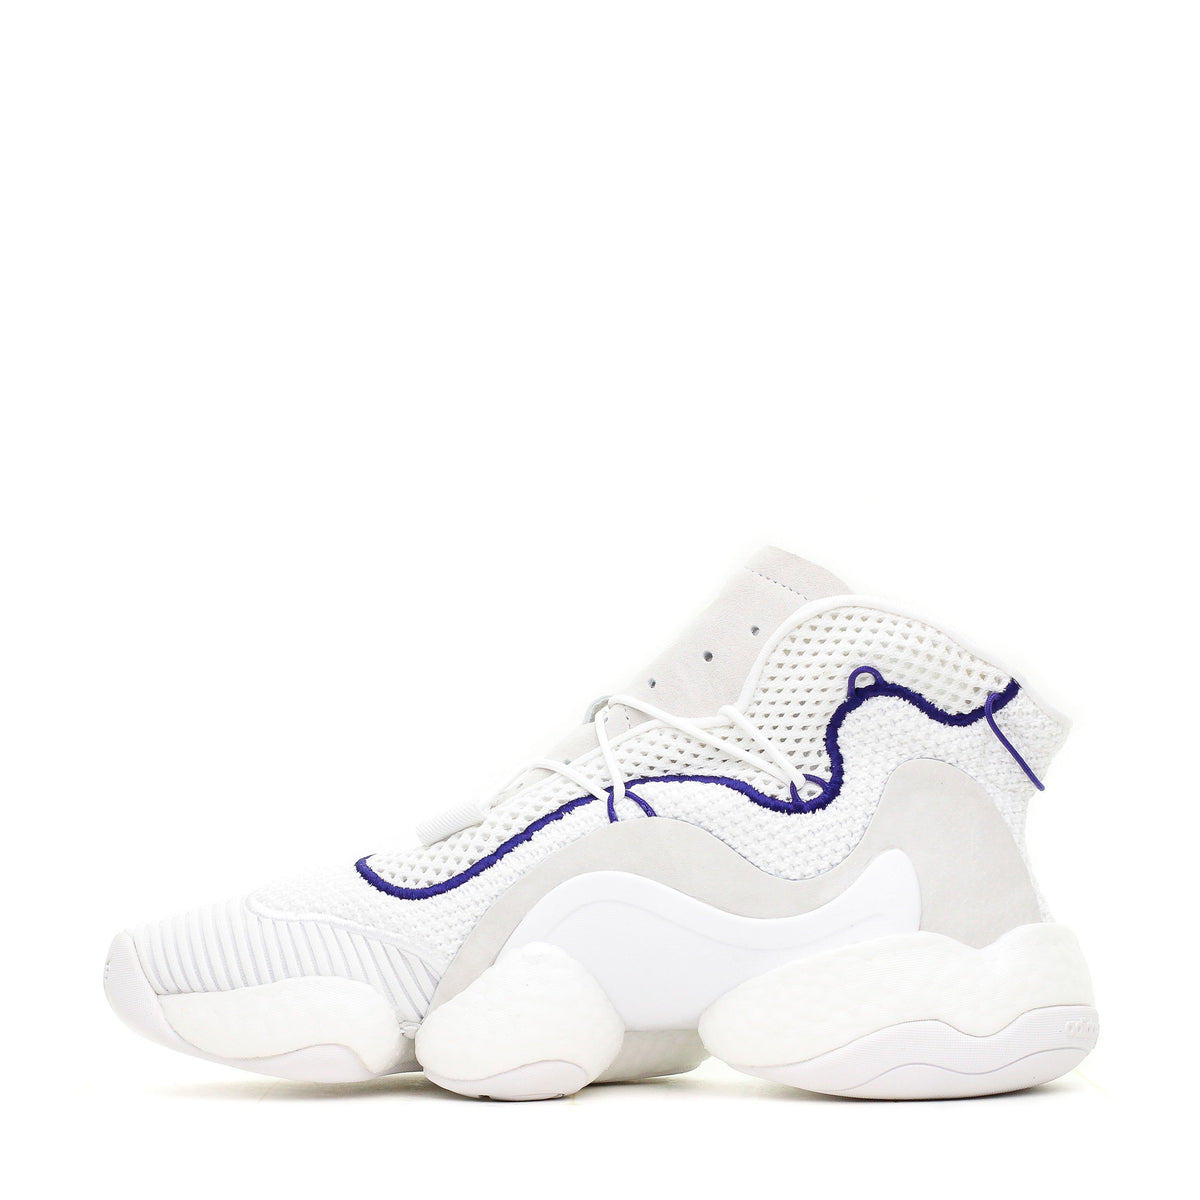 maorí Tren prototipo HotelomegaShops - Adidas Originals Crazy BYW LVL 1 Boost You Wear Basketball  White Purple CQ0992 (Fast - adidas lotus bottom sneakers shoes for women